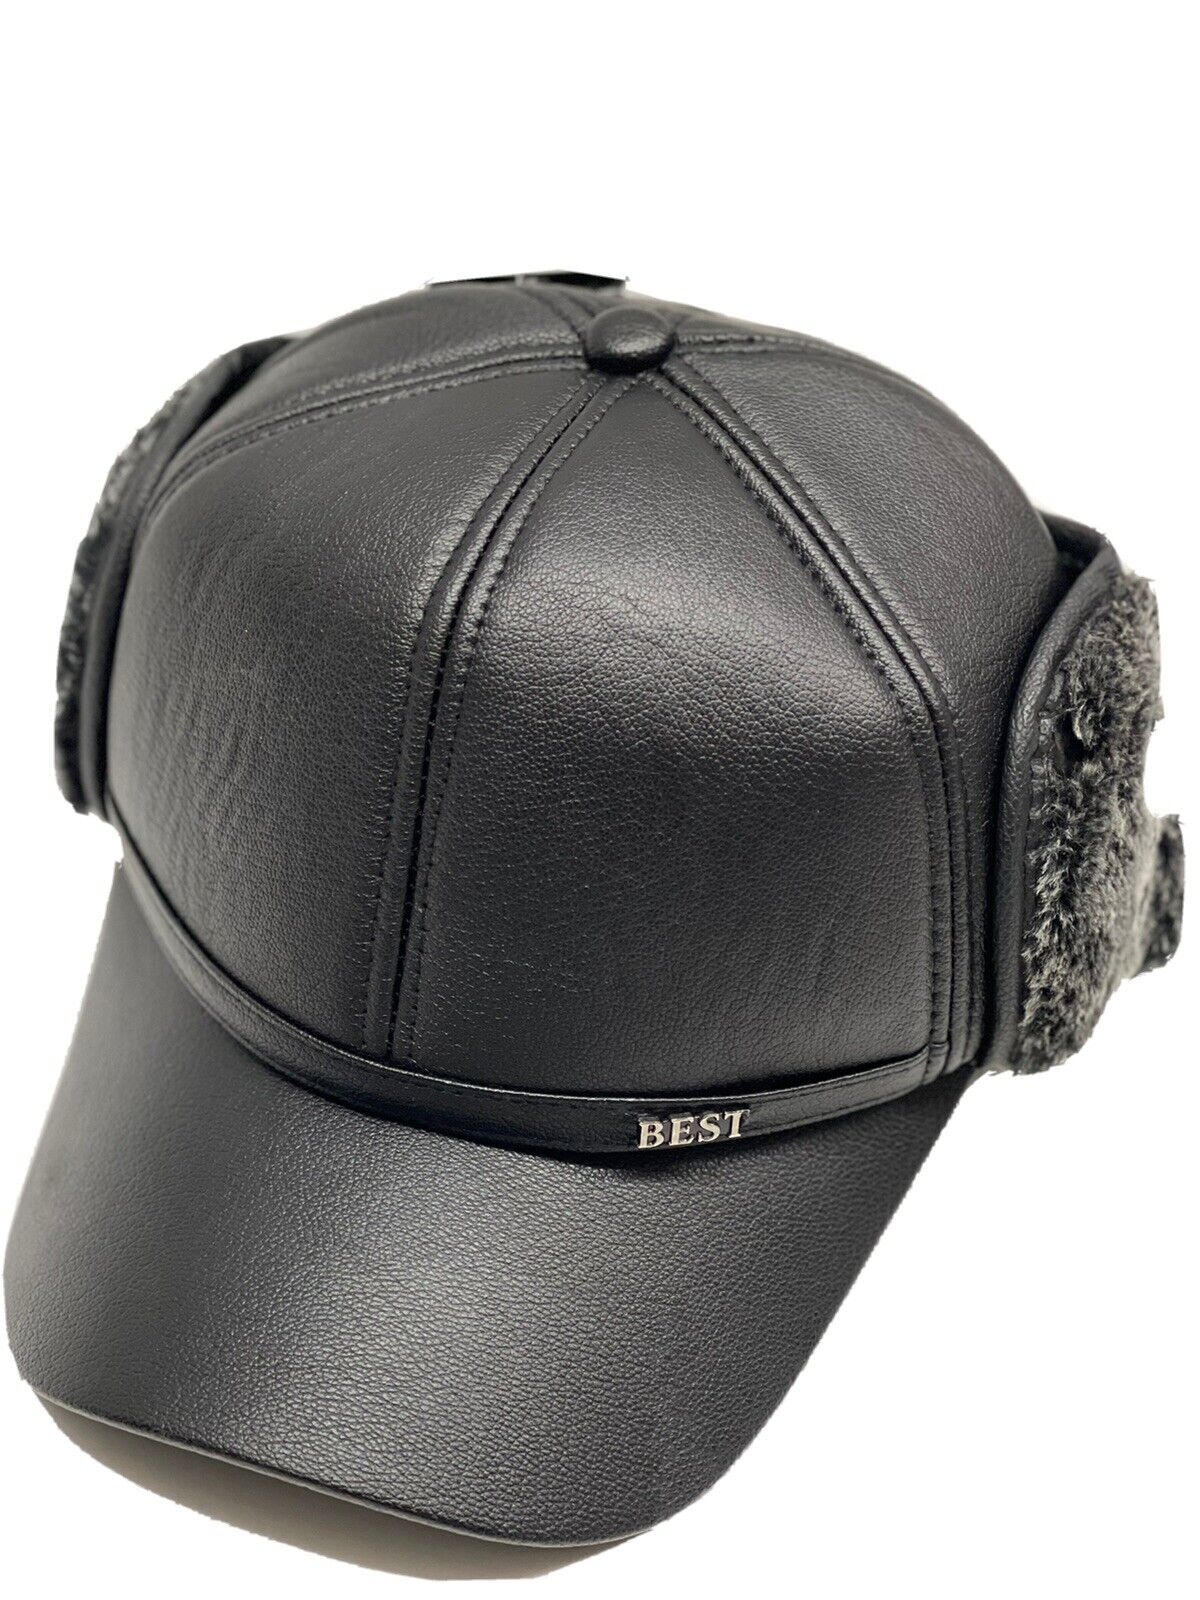 Men's Leather depot Baseball Caps Winter Hats Ear Warm with Max 77% OFF Cap Flaps